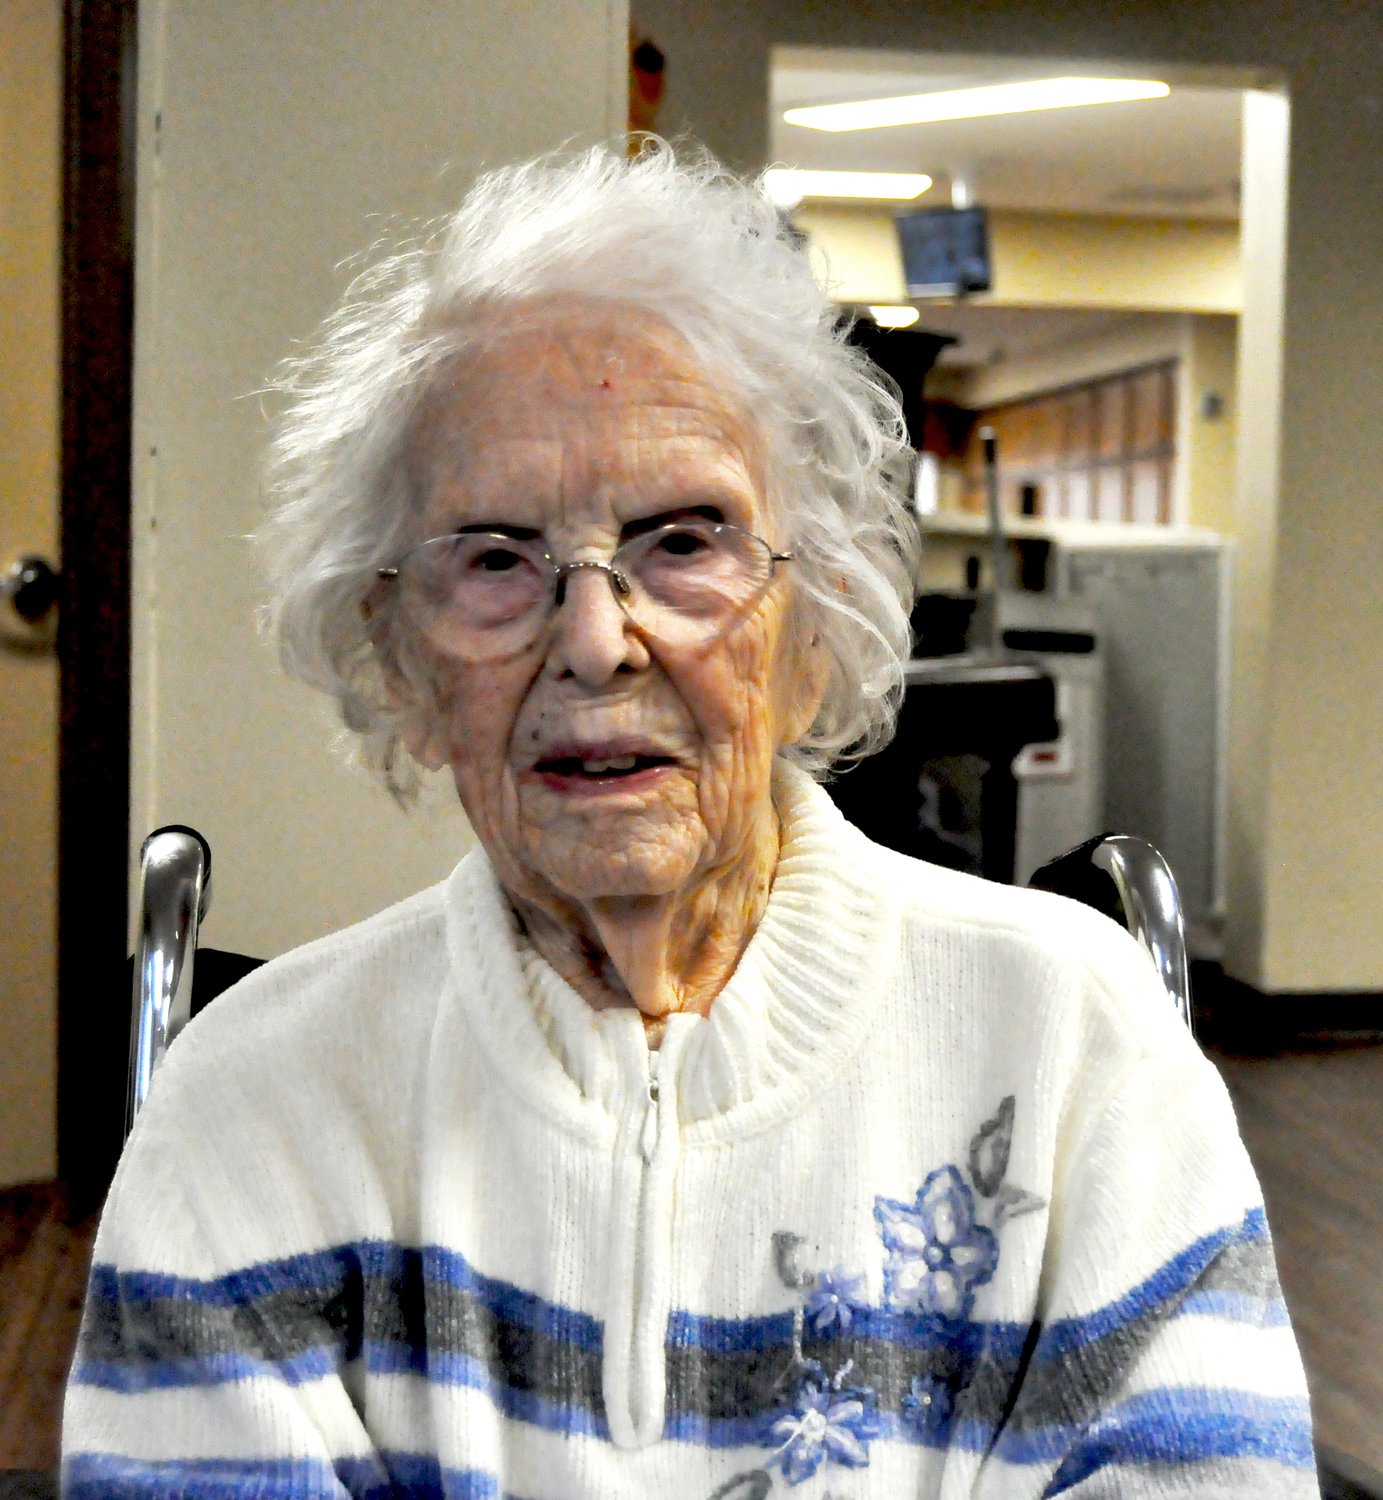 Sylvia Linn, 100, has a Birthday this Saturday. She is the middle child of 10, she is the only girl out of her 9 siblings. She talked about her life on the farm and growing up.